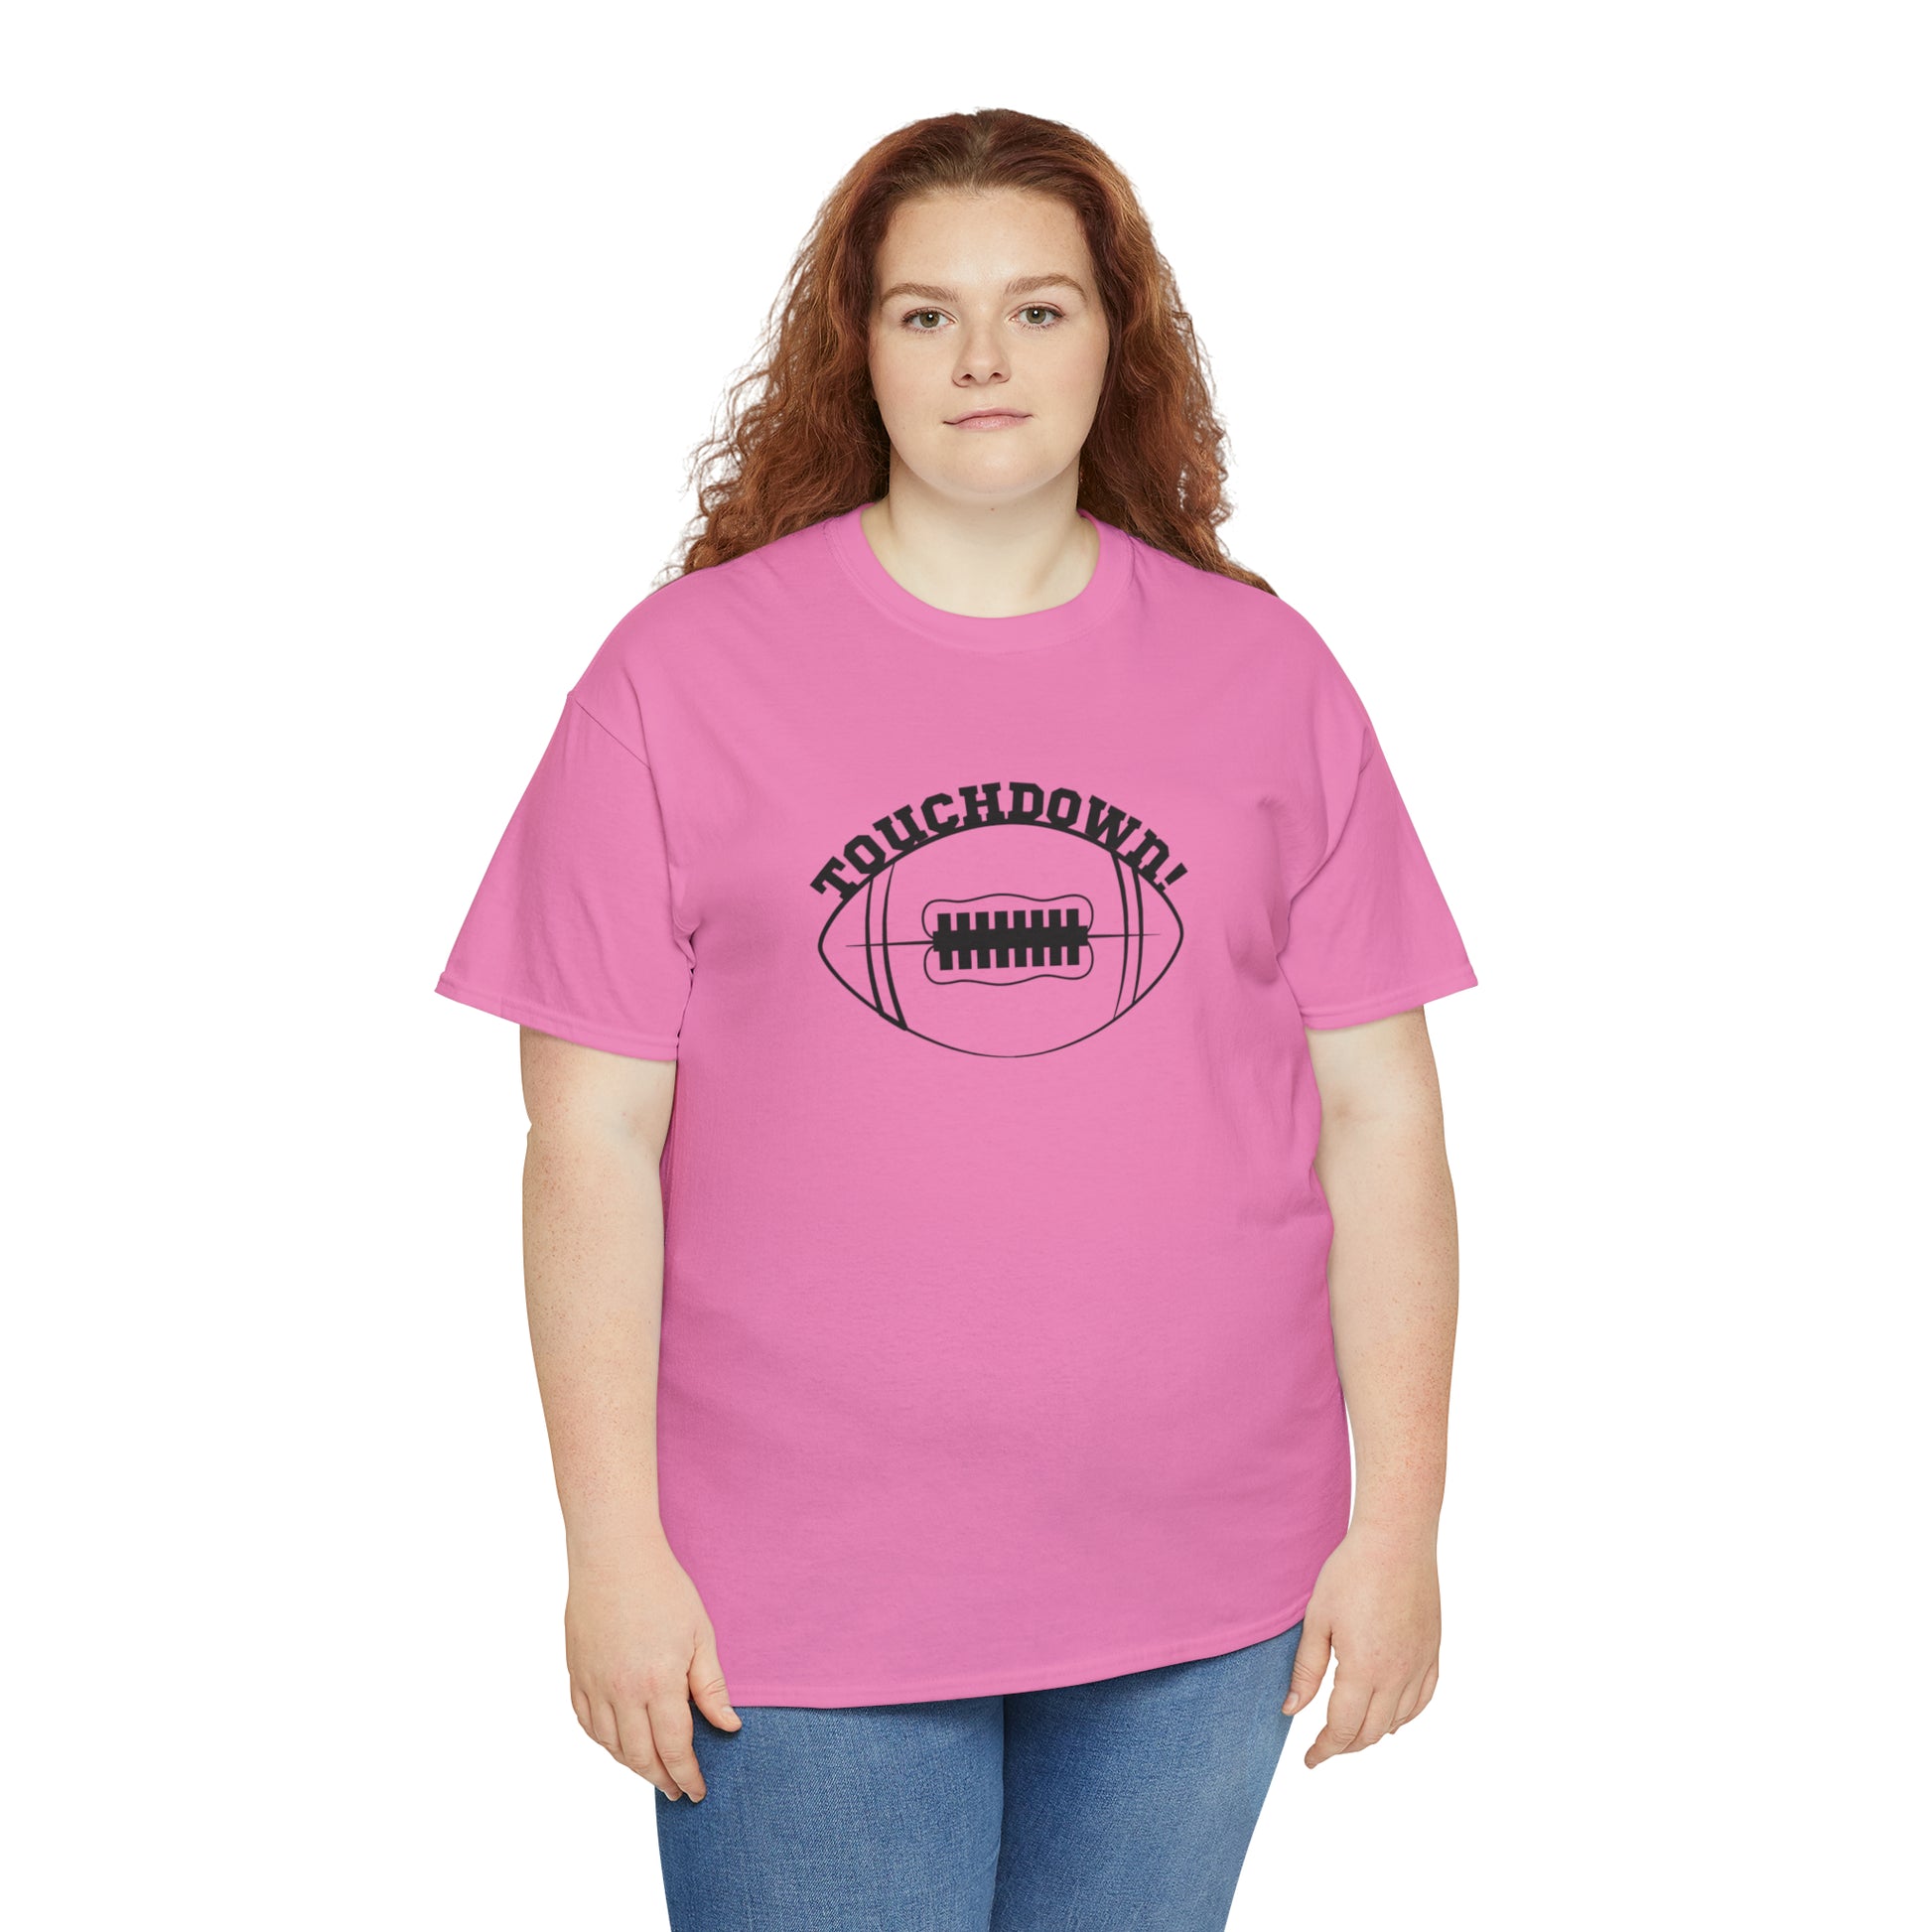 "Touchdown" T-Shirt - Weave Got Gifts - Unique Gifts You Won’t Find Anywhere Else!